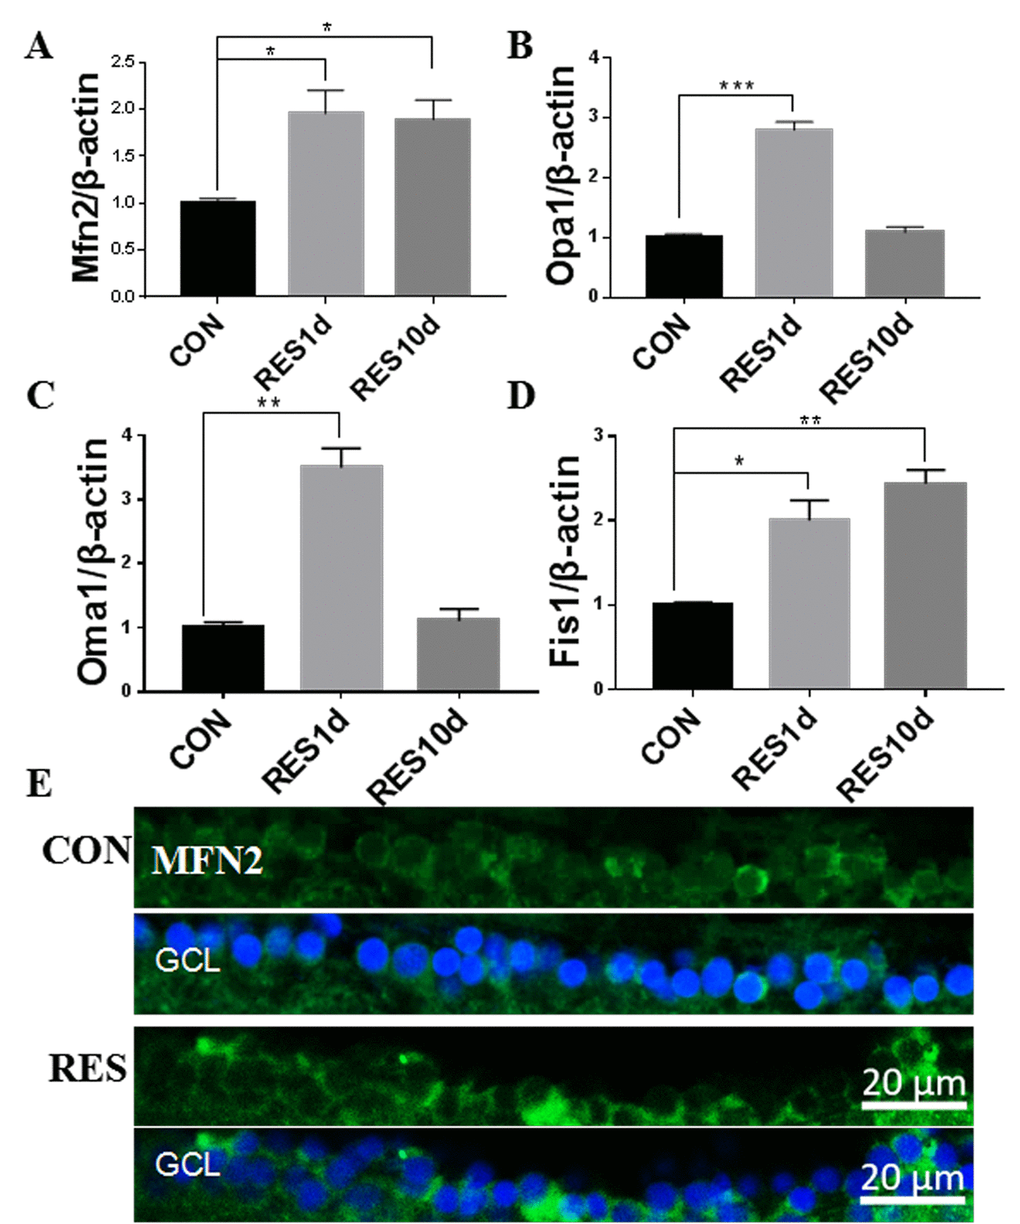 Resveratrol treatment increased mitochondrial fusion/fission expression in young zebrafish retina. (A-D) Mfn2, Opa1, Oma1, and Fis1 gene expression after resveratrol treatment for 1 or 10 days as determined by quantitative real-time PCR (mean ± SEM, *PE) Immunofluorescence localization and relative expression of Mfn2 in the RGC layer of adult zebrafish retina cross-sections after 10 days resveratrol treatment. All photographs were taken at 40x magnification. CON, control; RES1d, resveratrol treated for 1 days; RES/RES10d, resveratrol treated for 10 days; GCL, ganglion cell layer.